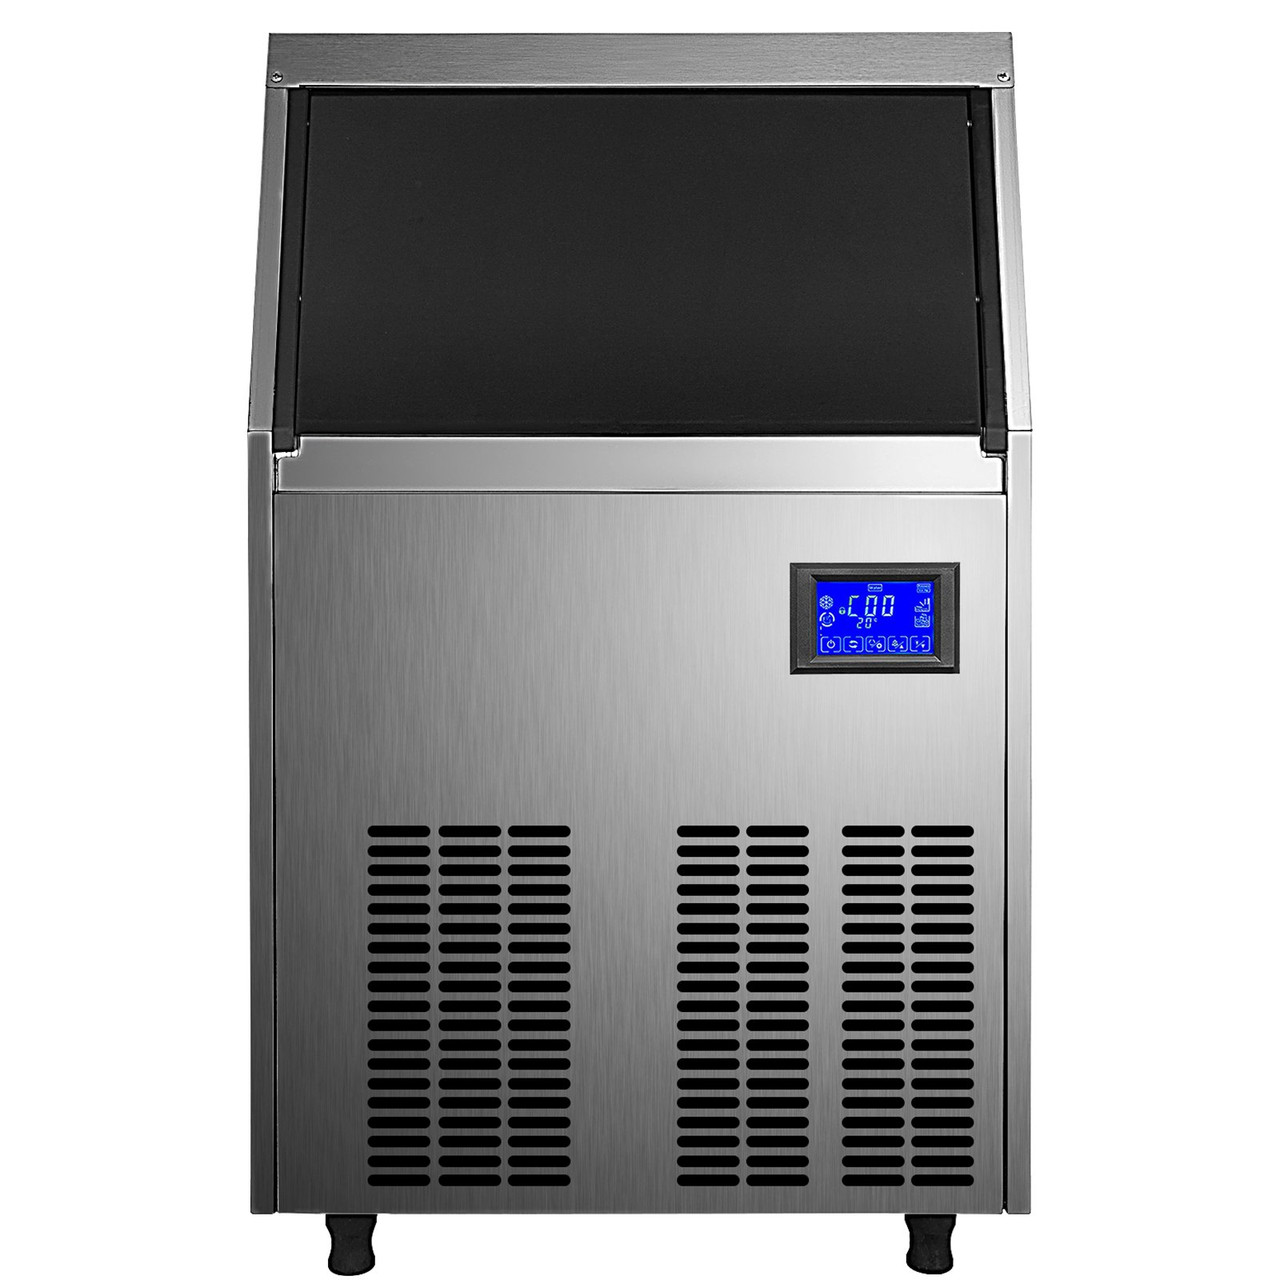 VEVOR 110V Commercial Ice Maker 110 LBS in 24 Hrs with Water Drain Pump 33LBS Storage Stainless Steel Commercial Ice Machine 4x8 Ice Tray LCD Control Auto Clean for Bar Home Supermarkets